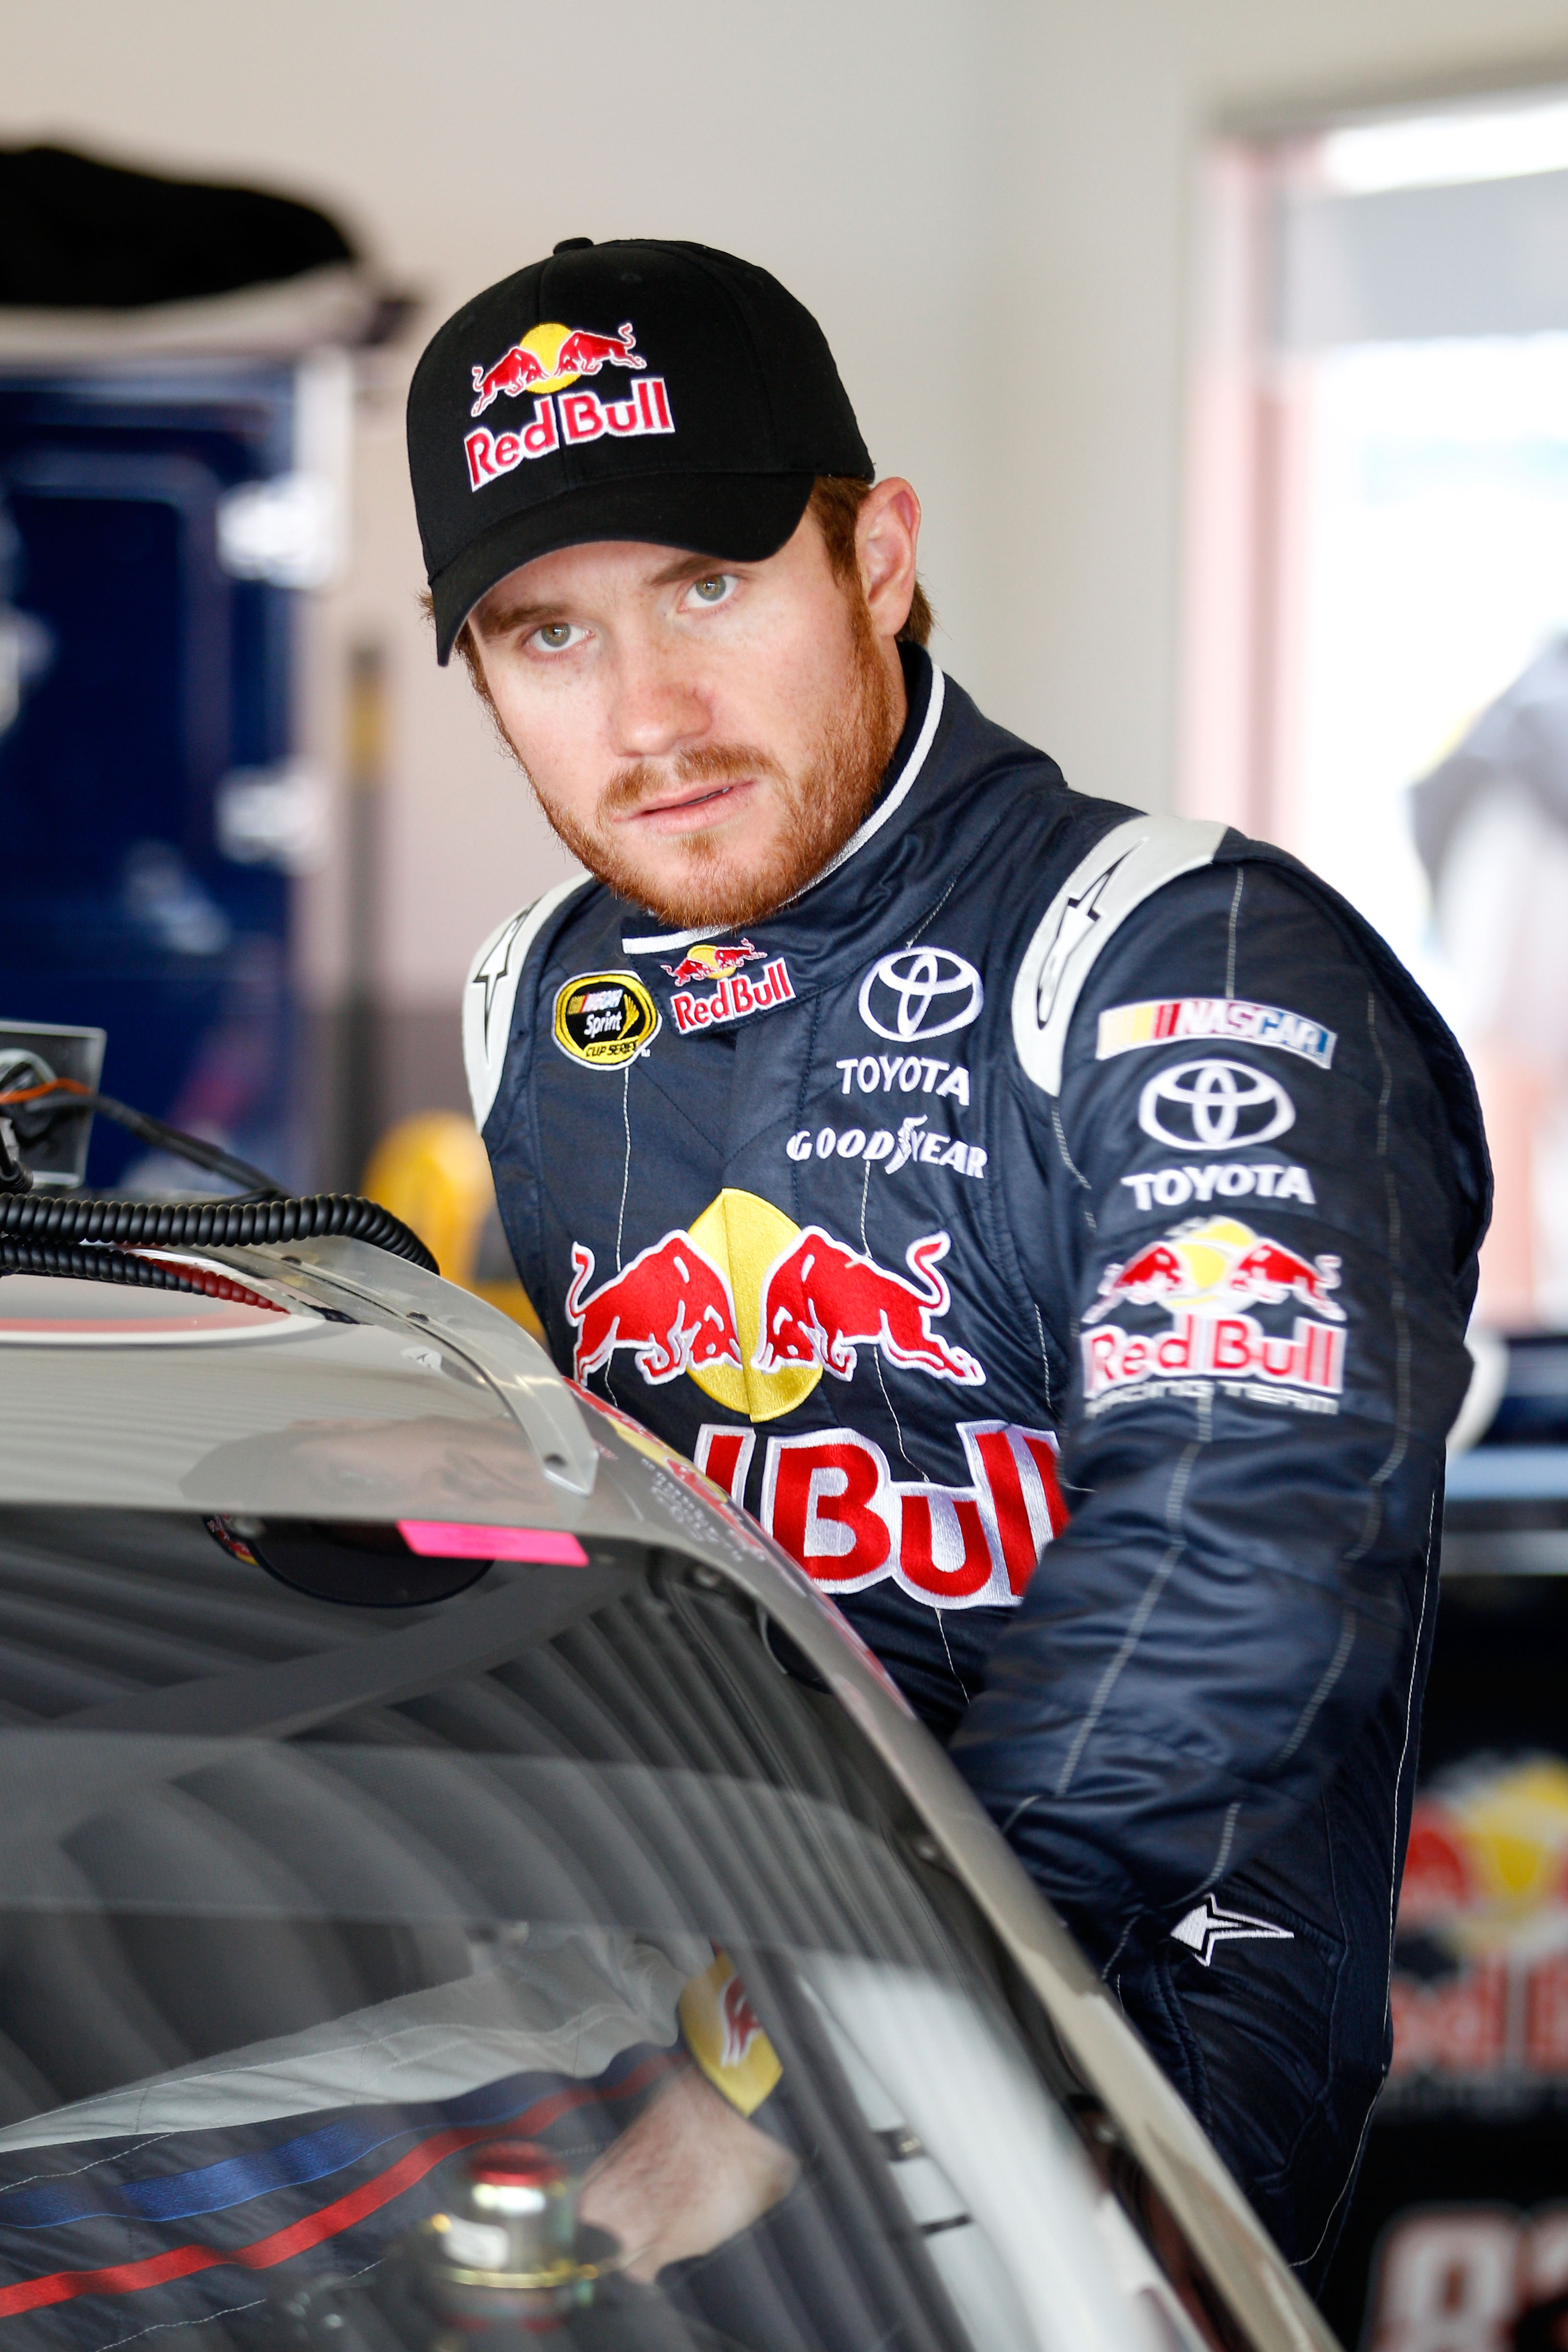 DAYTONA BEACH, FL - FEBRUARY 16:  Brian Vickers, driver of the #83 Red Bull Toyota, gets into his car in the garage area during practice for the NASCAR Sprint Cup Series Daytona 500 at Daytona International Speedway on February 16, 2011 in Daytona Beach,